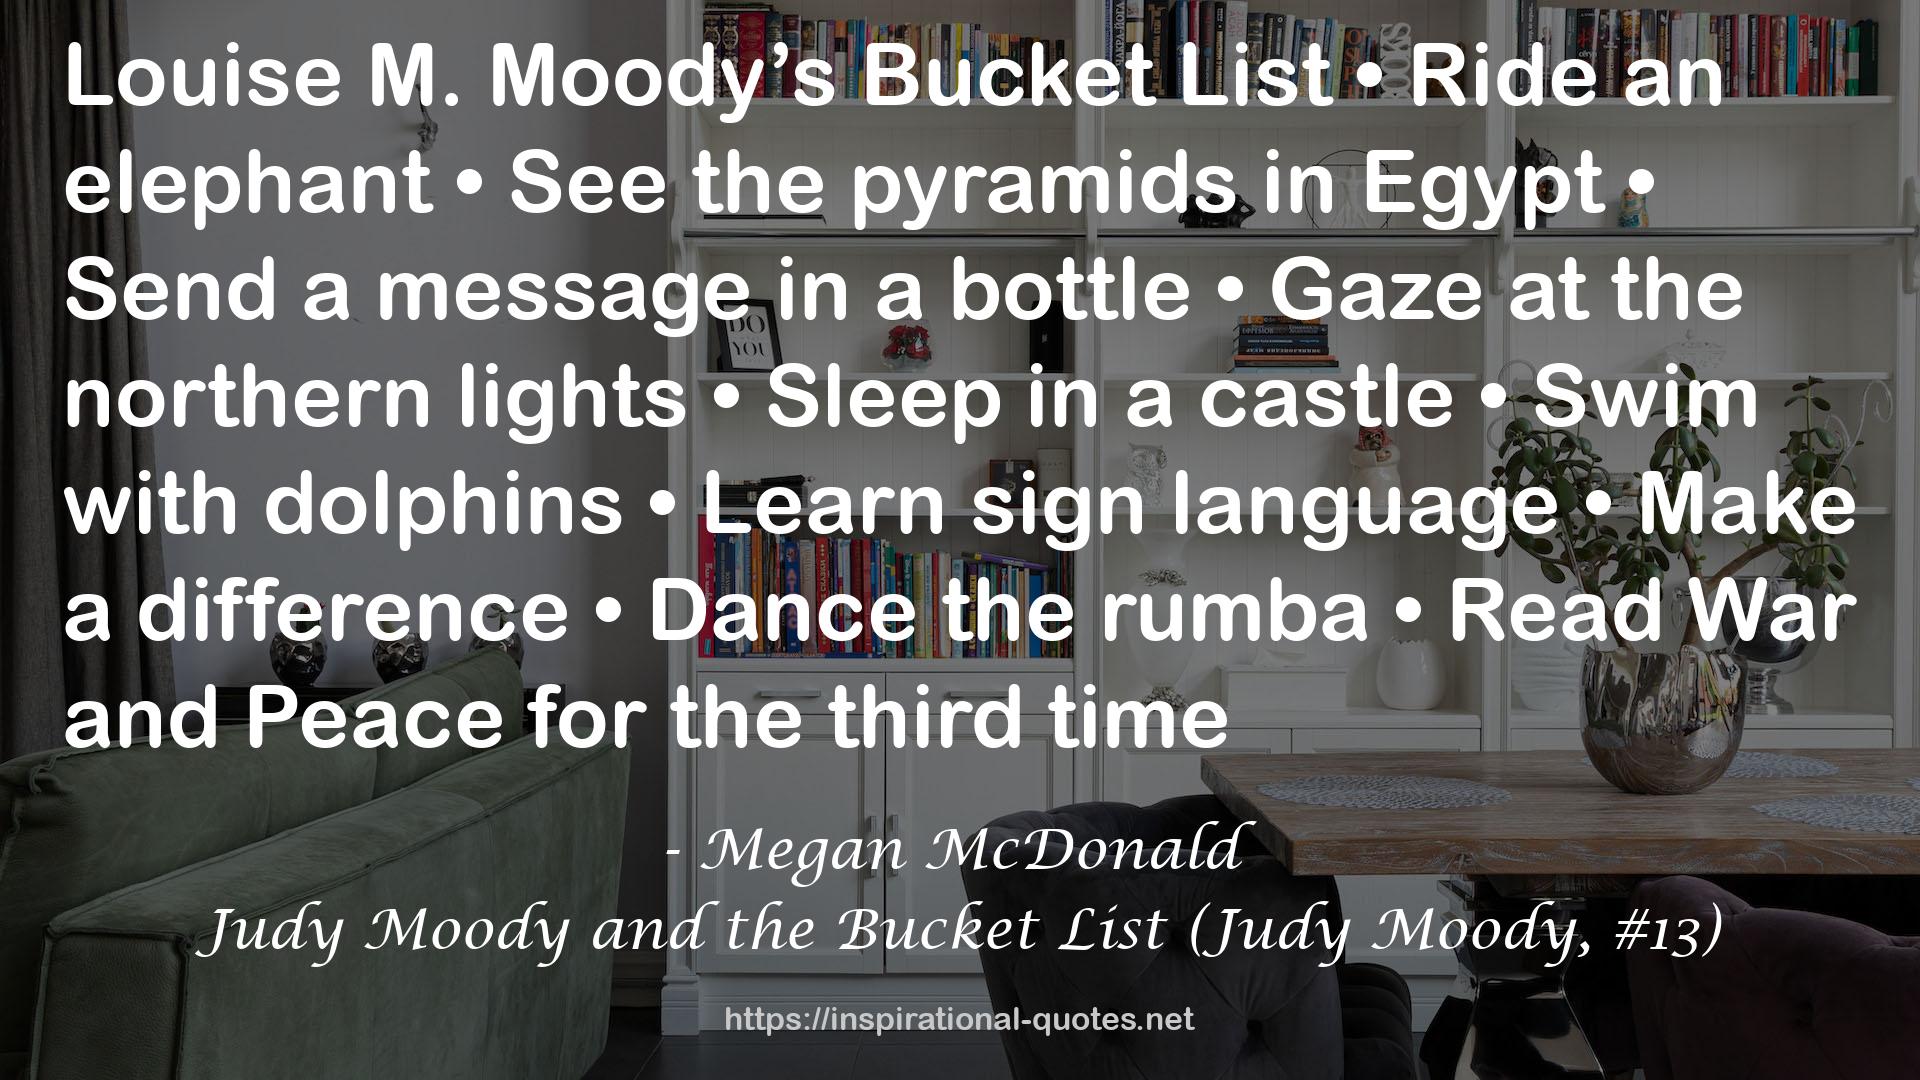 Judy Moody and the Bucket List (Judy Moody, #13) QUOTES